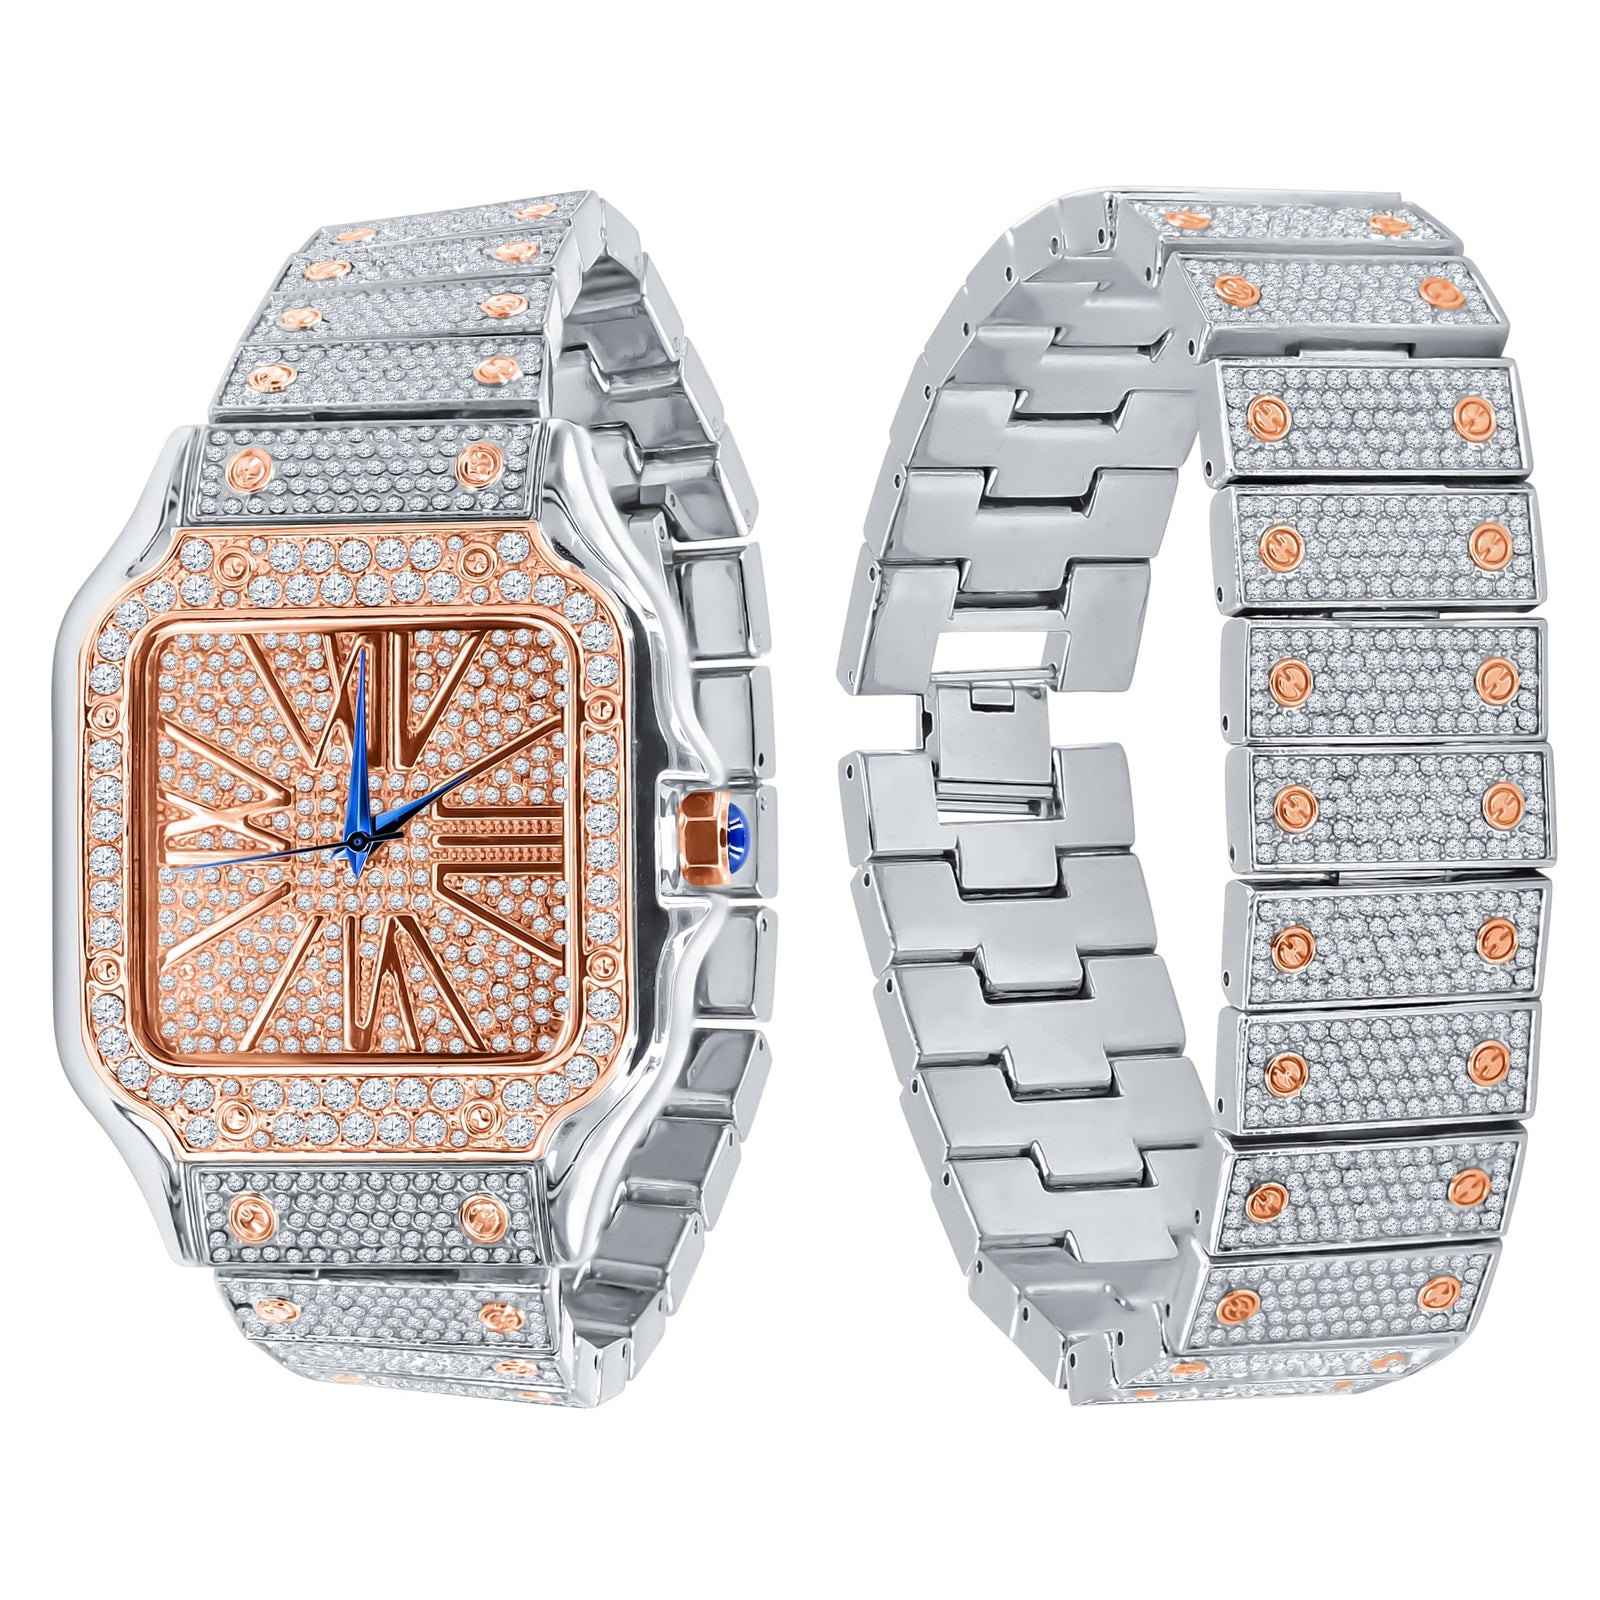 STAINLESS STEEL CRYSTAL WATCH SET